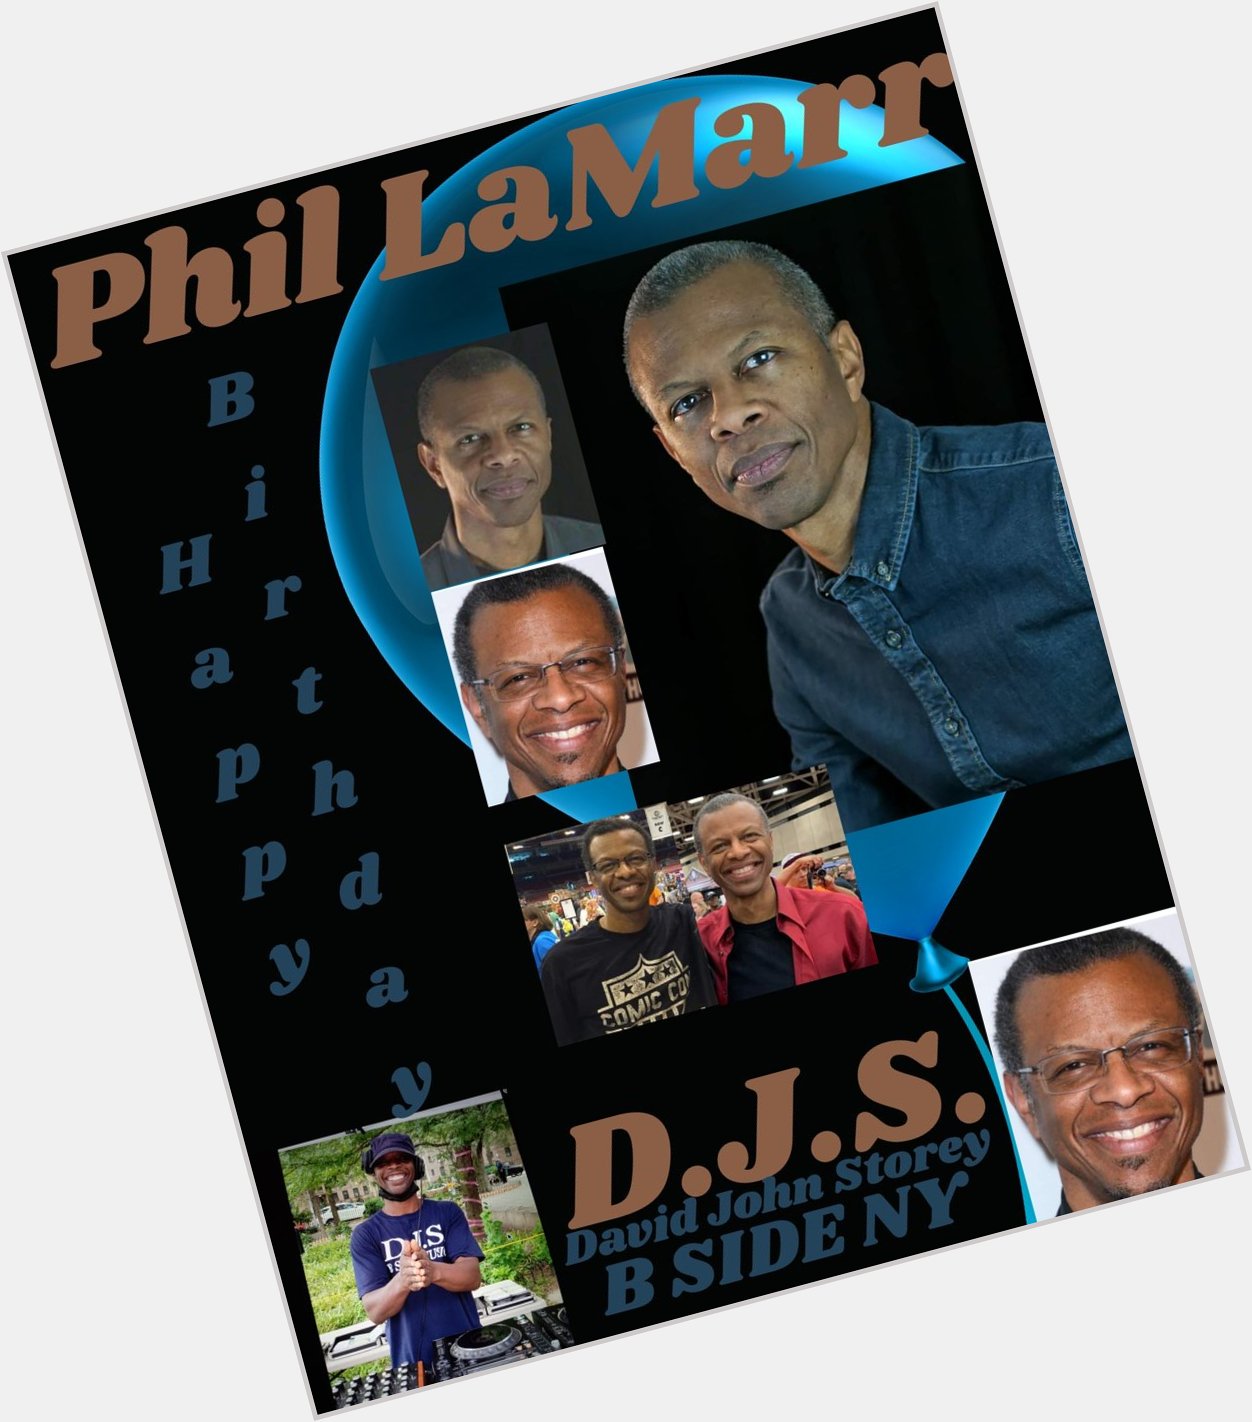 I(D.J.S.)\"B SIDE\" taking time to say Happy Birthday to Comedian/Actor: \"PHIL LAMARR\"!!!! 